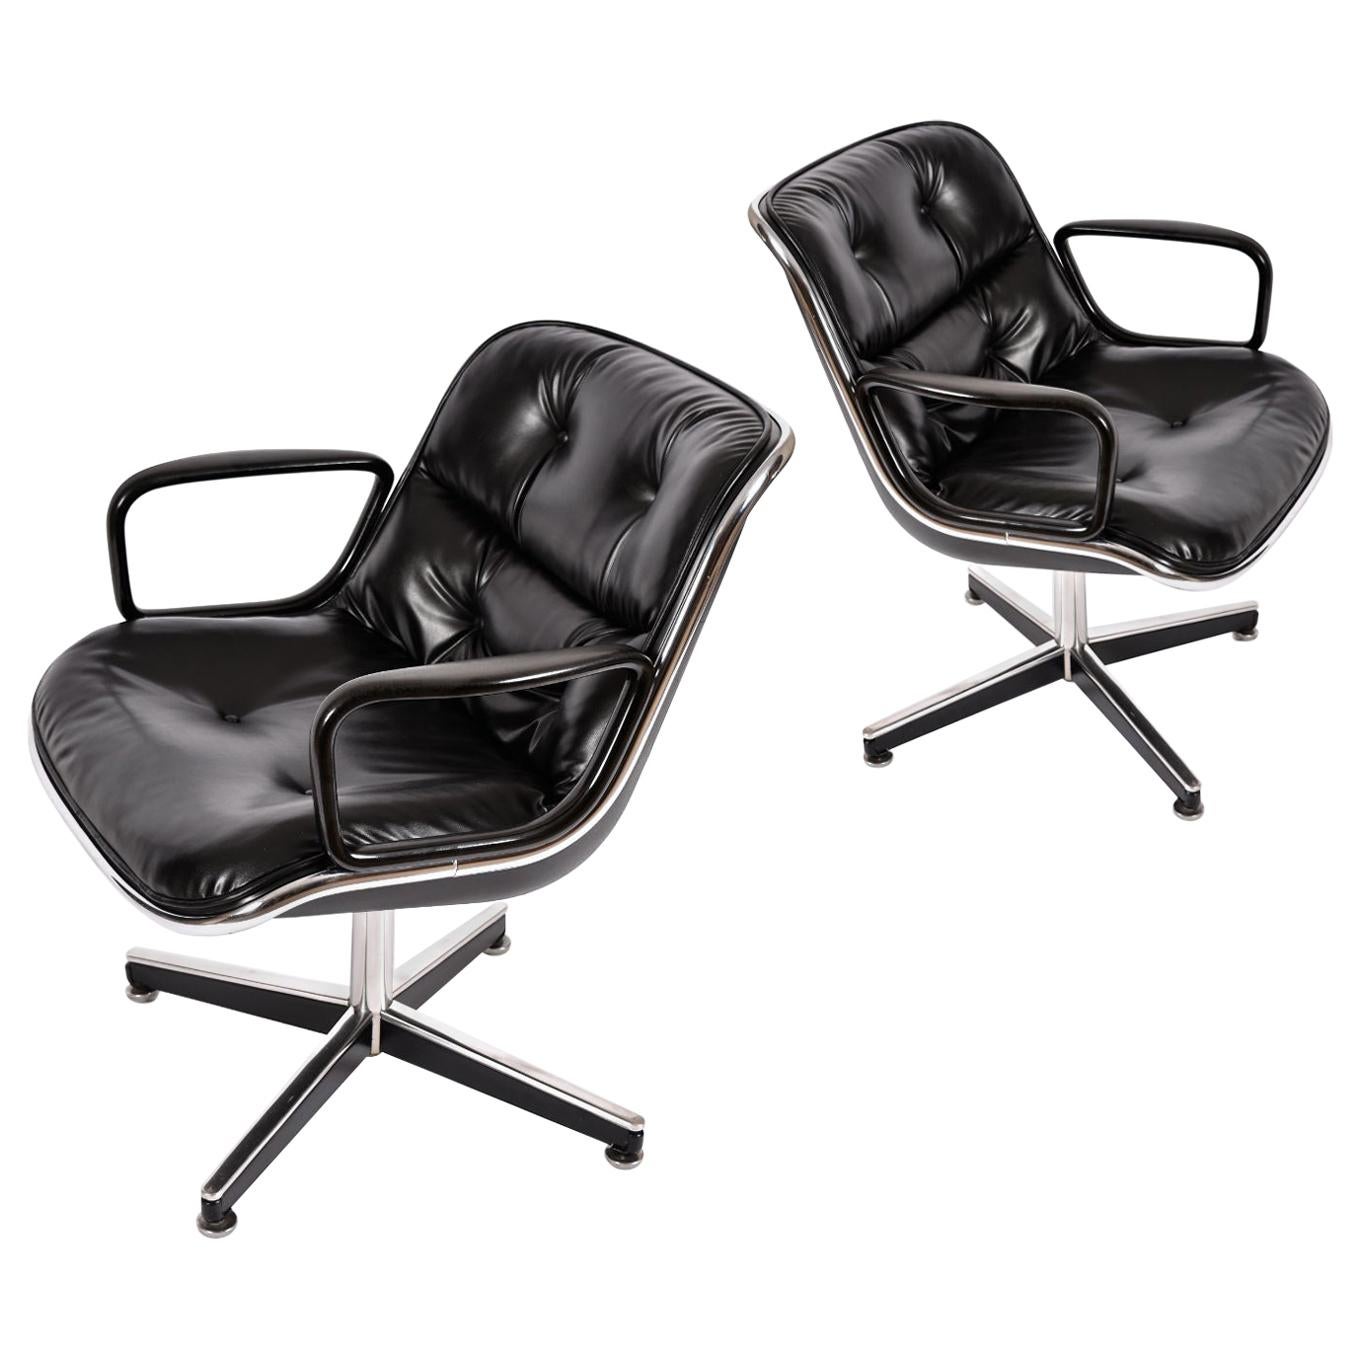 Pair of vintage 1972 executive chairs designed by Charles Pollock for Knoll. The chairs come in their original black leather upholstery. The leather is in miraculous condition for it’s age with a deep hue and luster. Our restoration team cleaned and